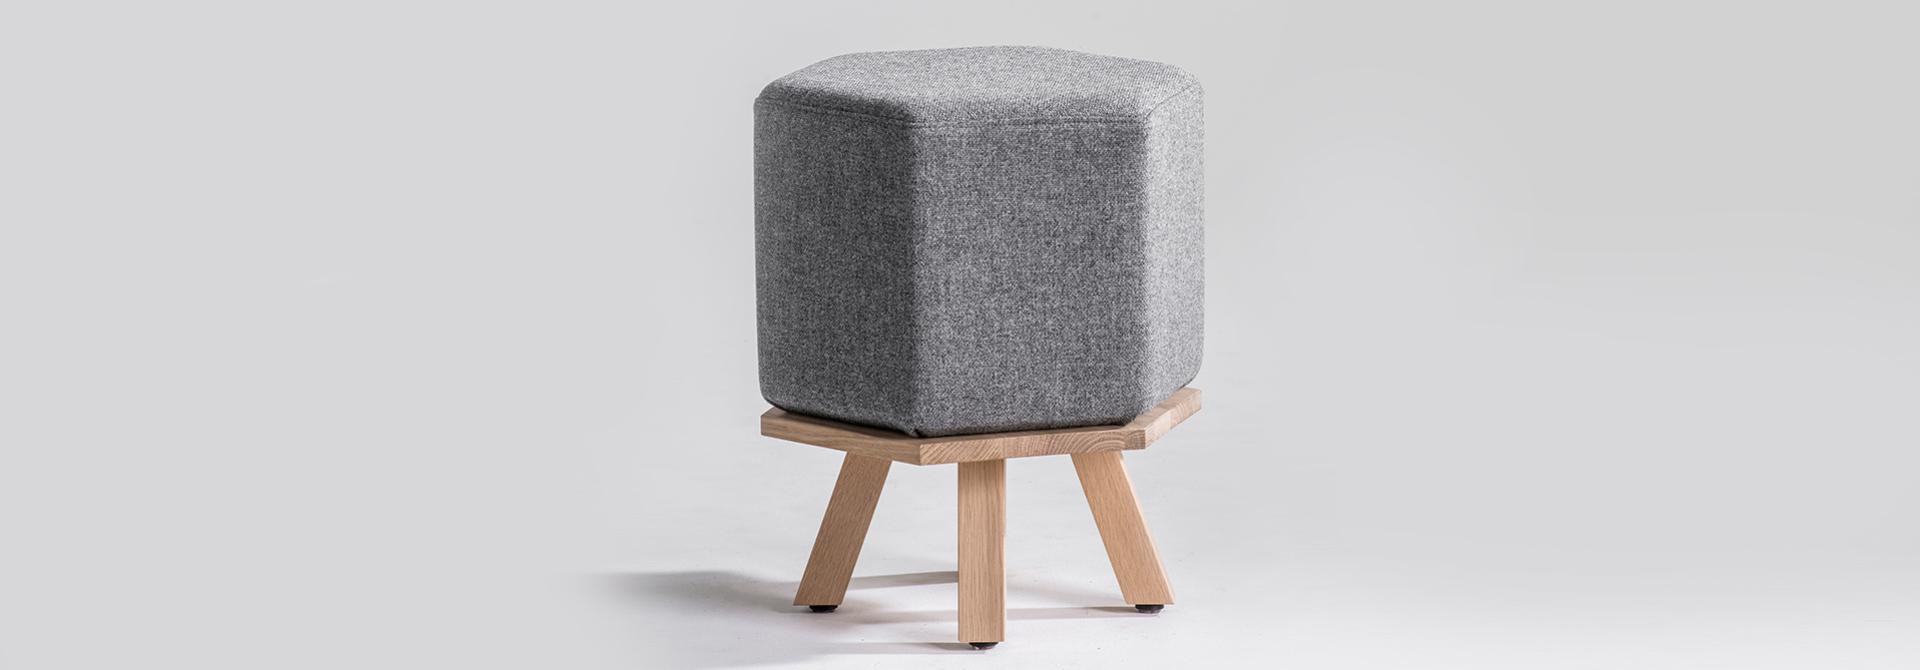 Pouf Hex gray with wood table legs 